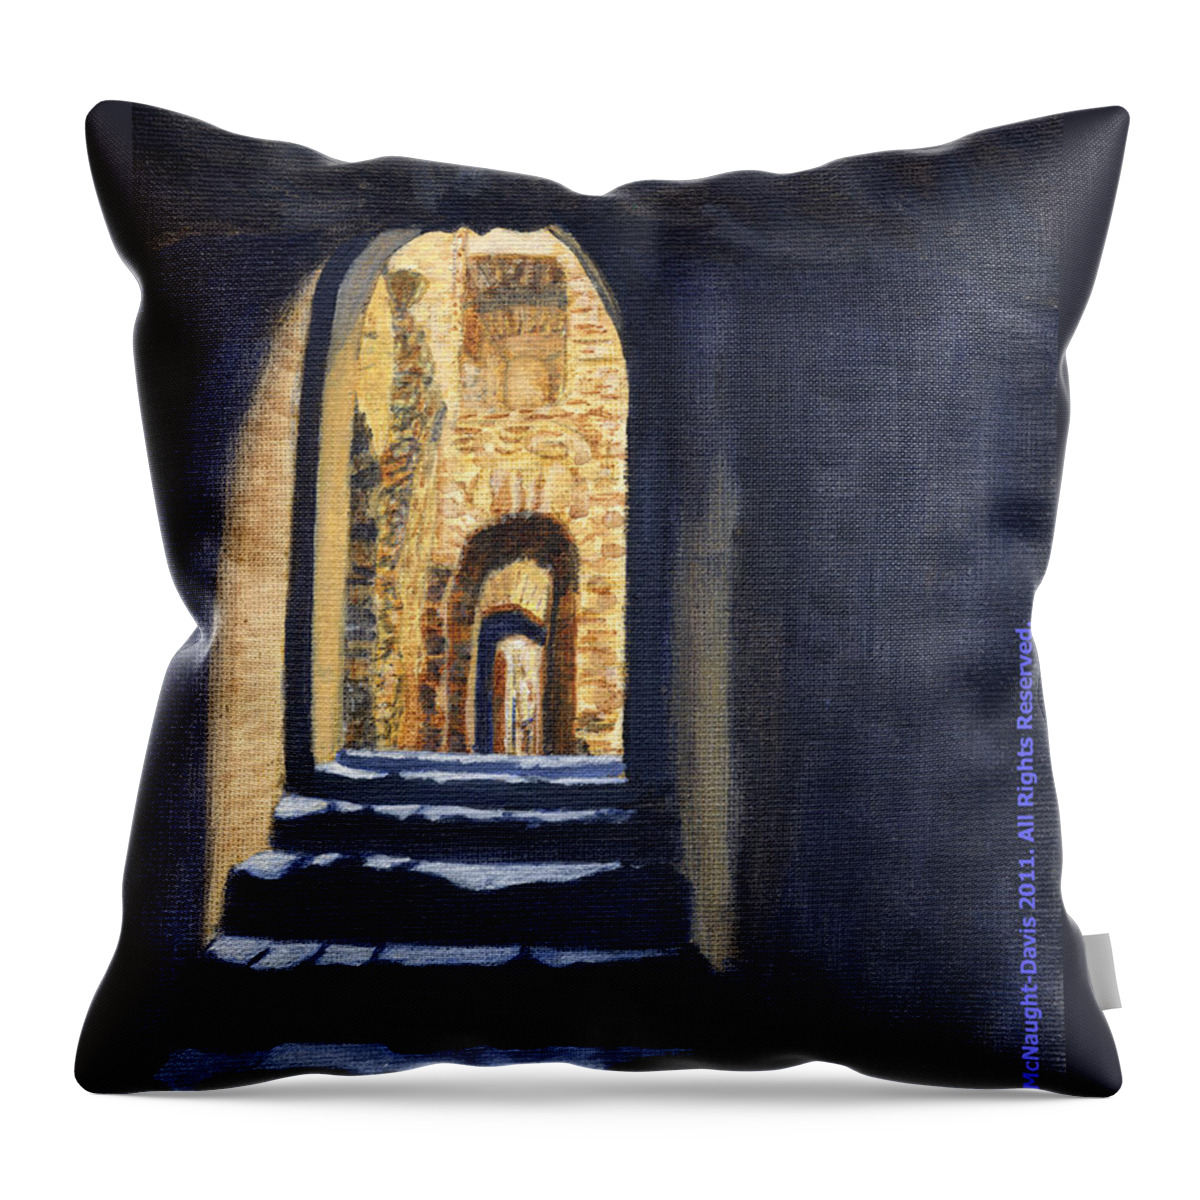 Into The Light Throw Pillow featuring the painting Into the Light Spiritual Metaphorical Painting by Edward McNaught-Davis